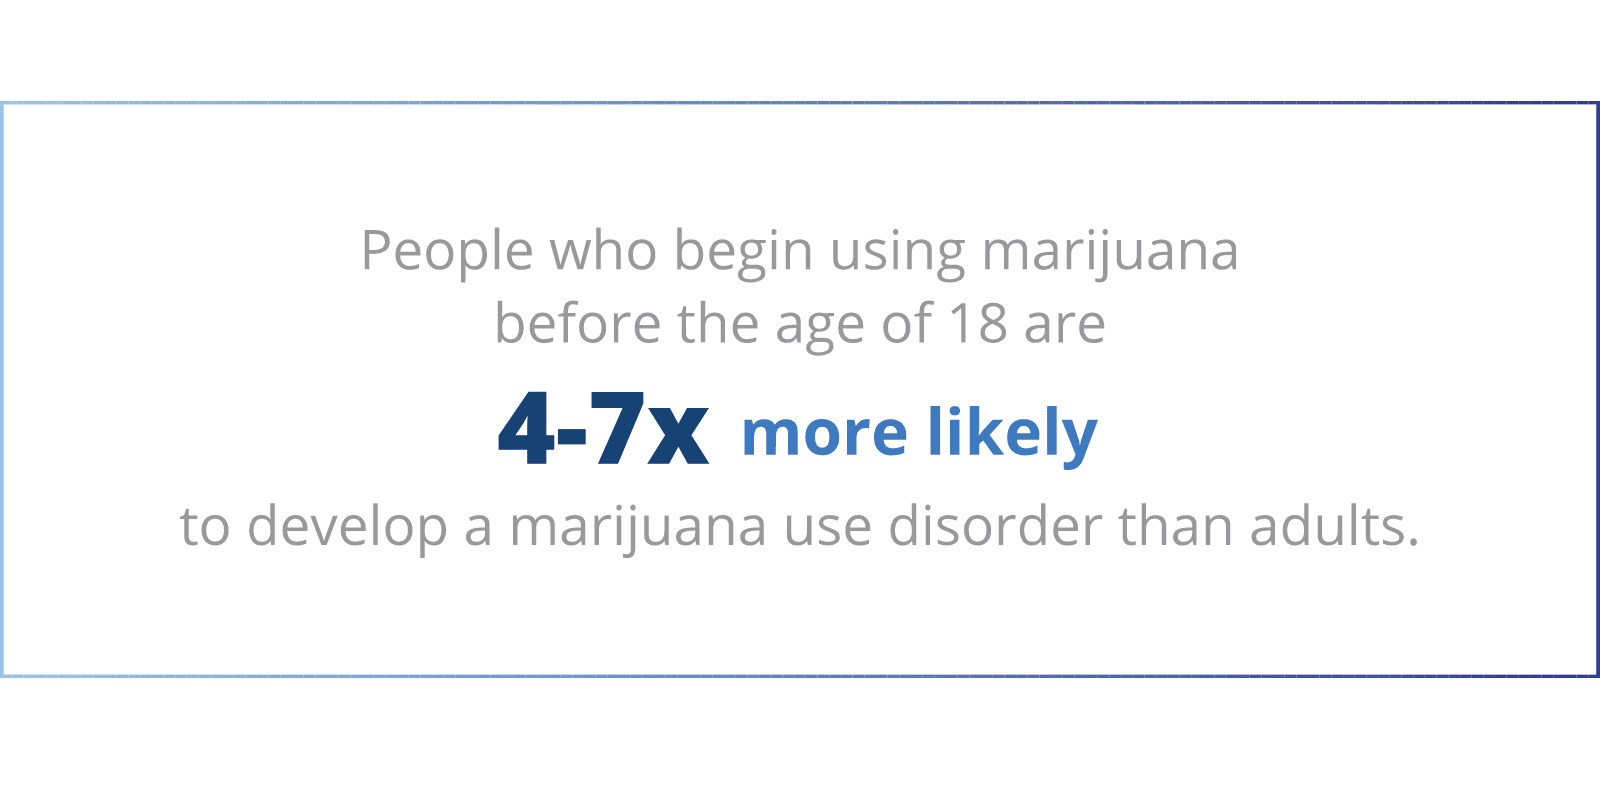 People who begin using marijuana before the age of 18 are 4-7x more likely to develop a marijuana use disorder than adults